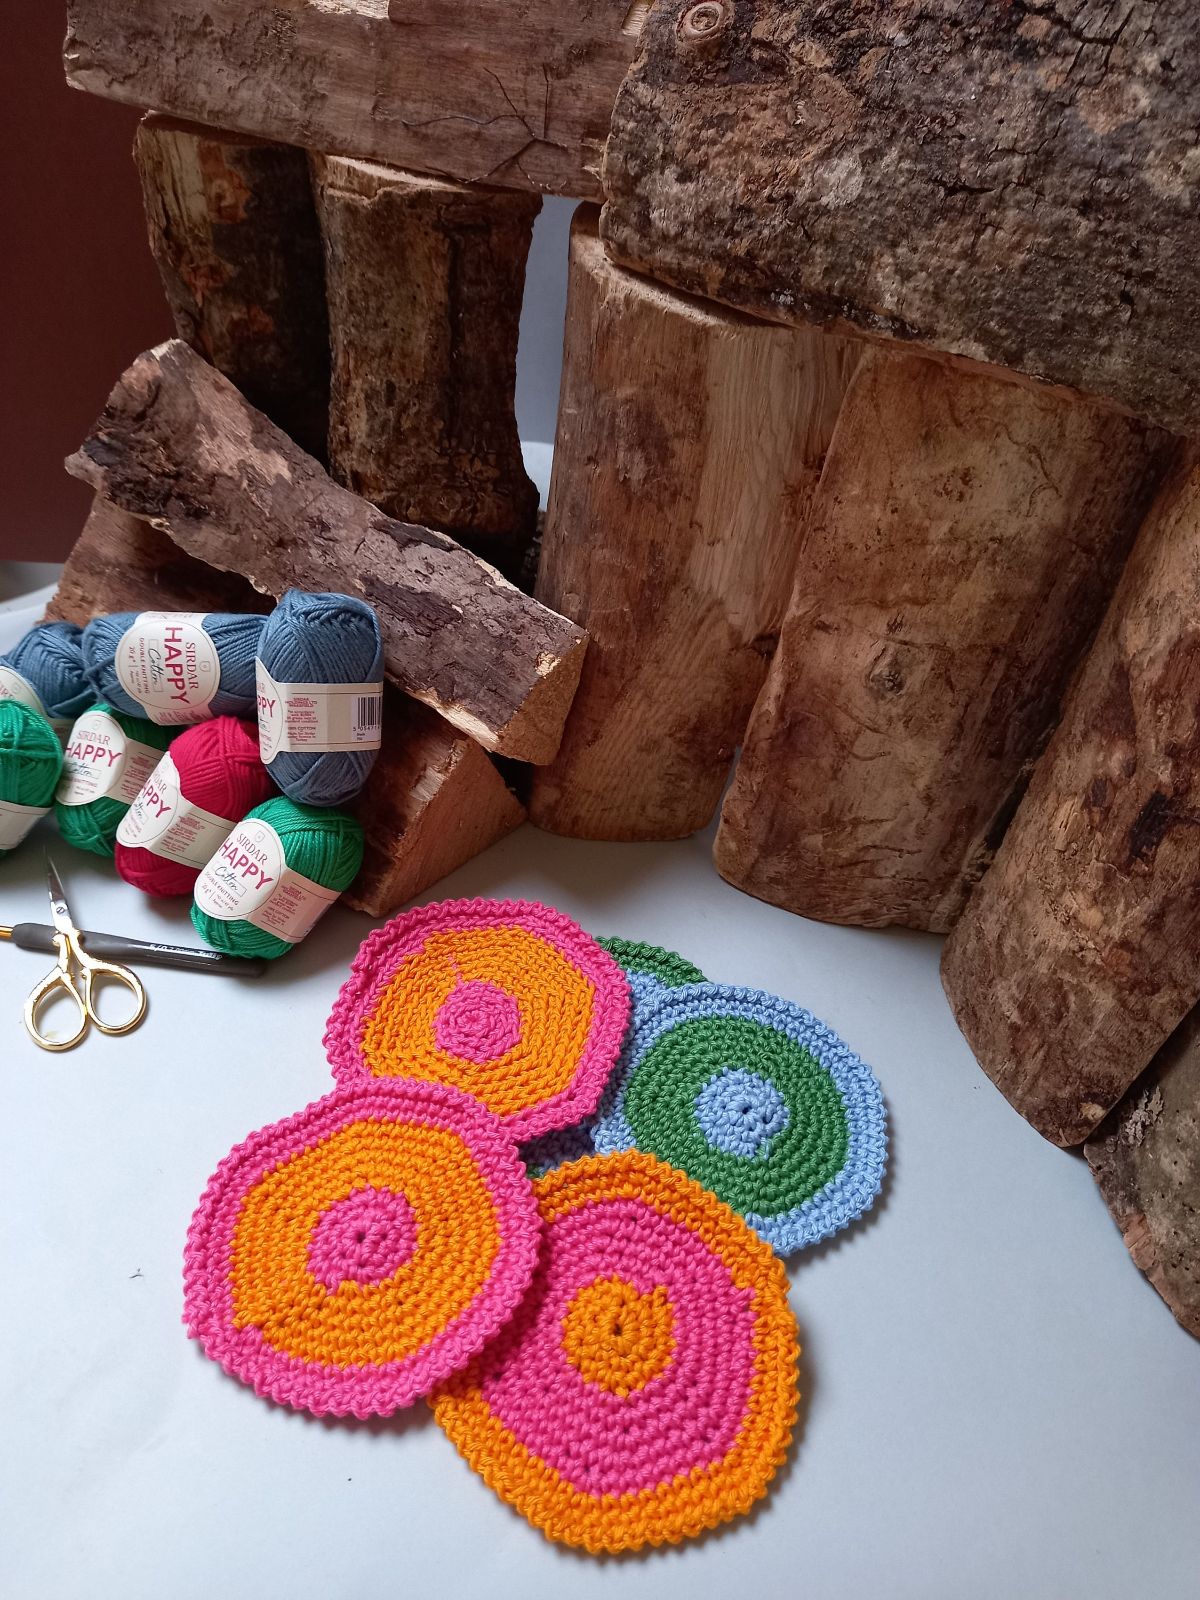 Orange and pink small round crochet coasters on top of blue and green coasters next to firewood and a small pile of pink, blue, and green yarn. 